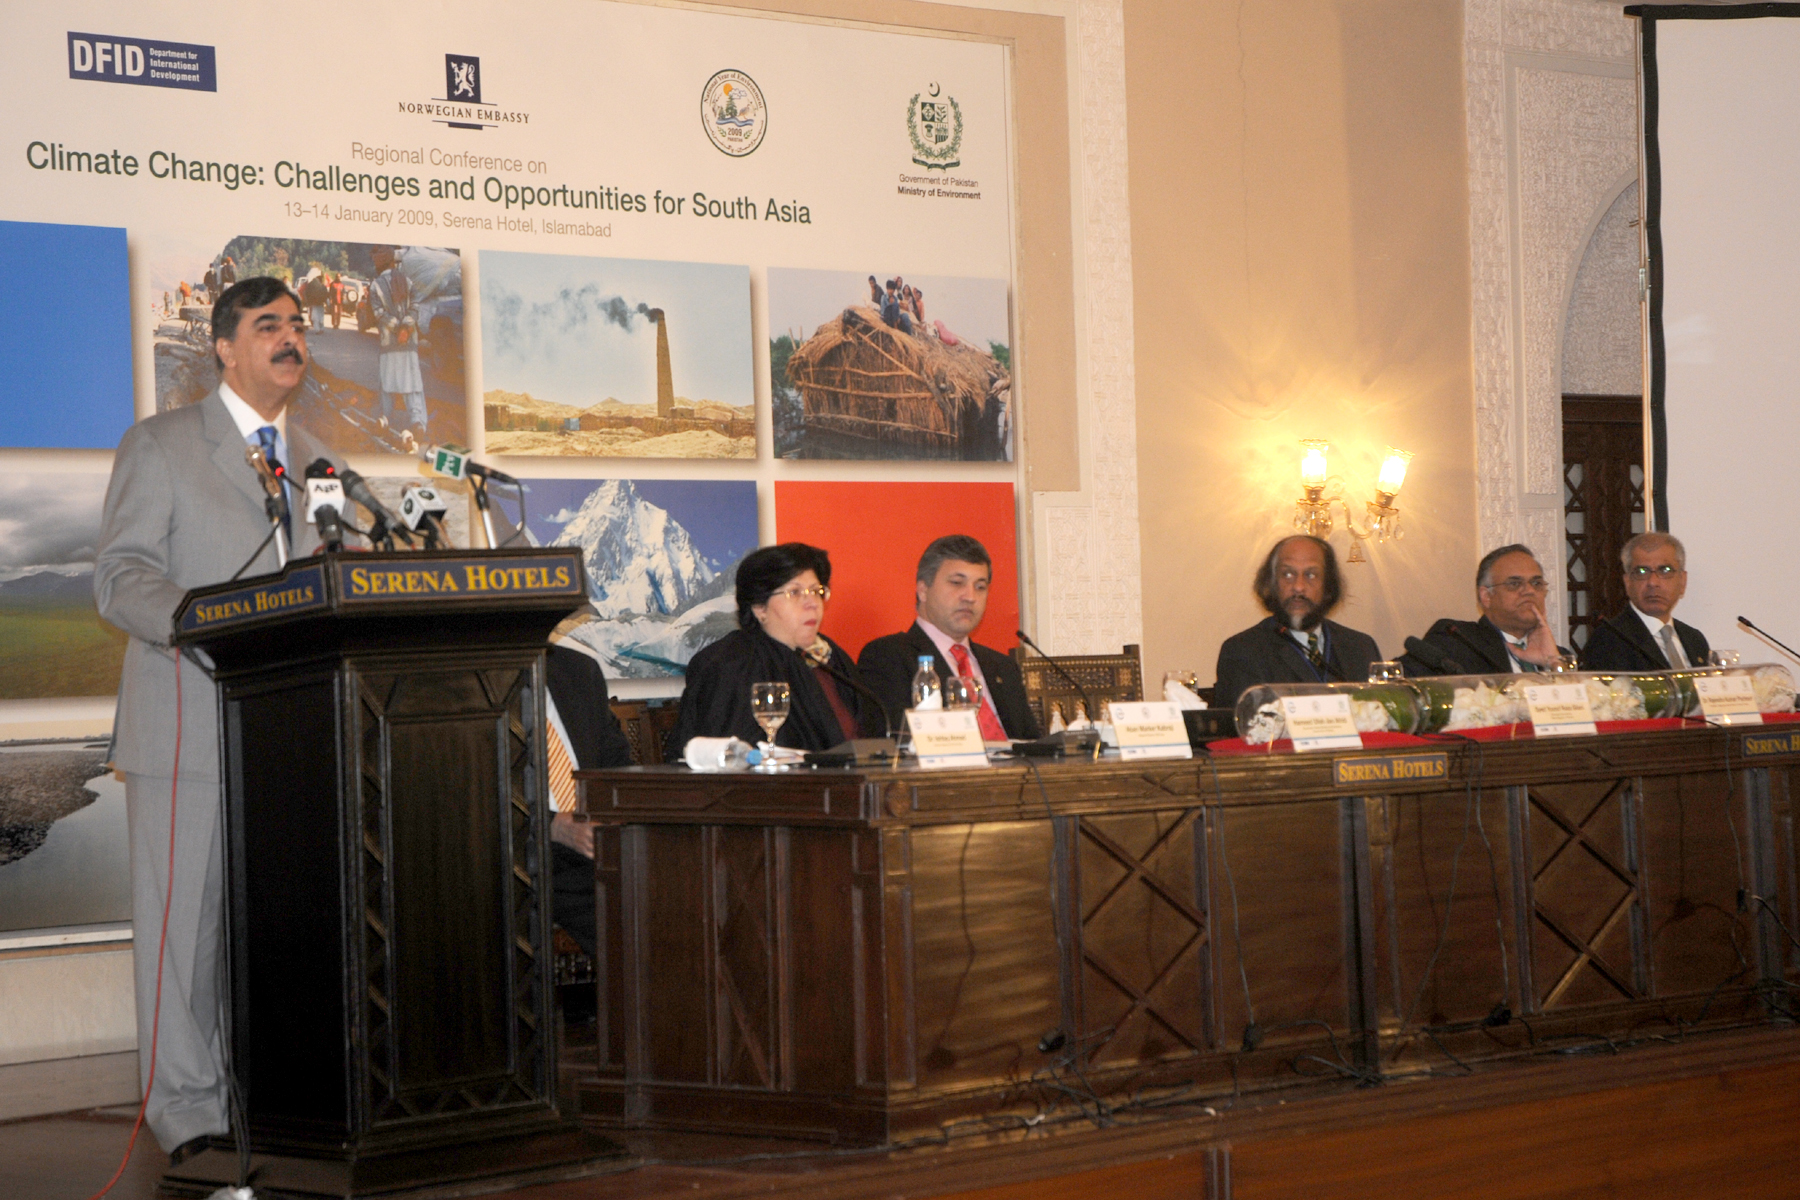 Prime Minister of Pakistan addressing the Regional Conference on Climate Change 2009